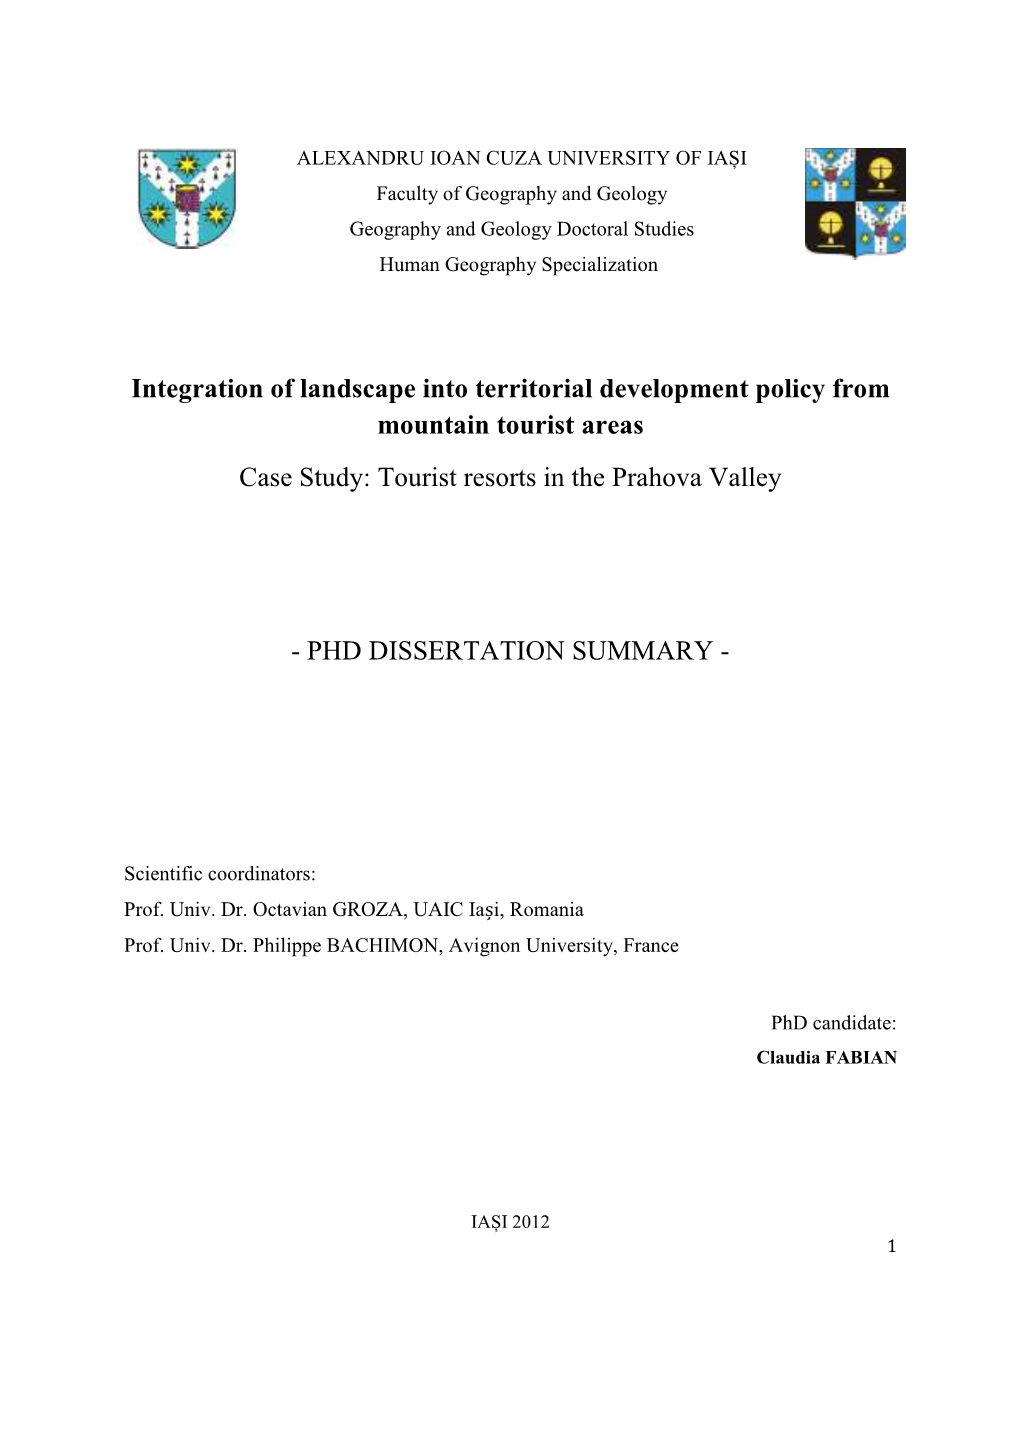 Integration of Landscape Into Territorial Development Policy from Mountain Tourist Areas Case Study: Tourist Resorts in the Prahova Valley